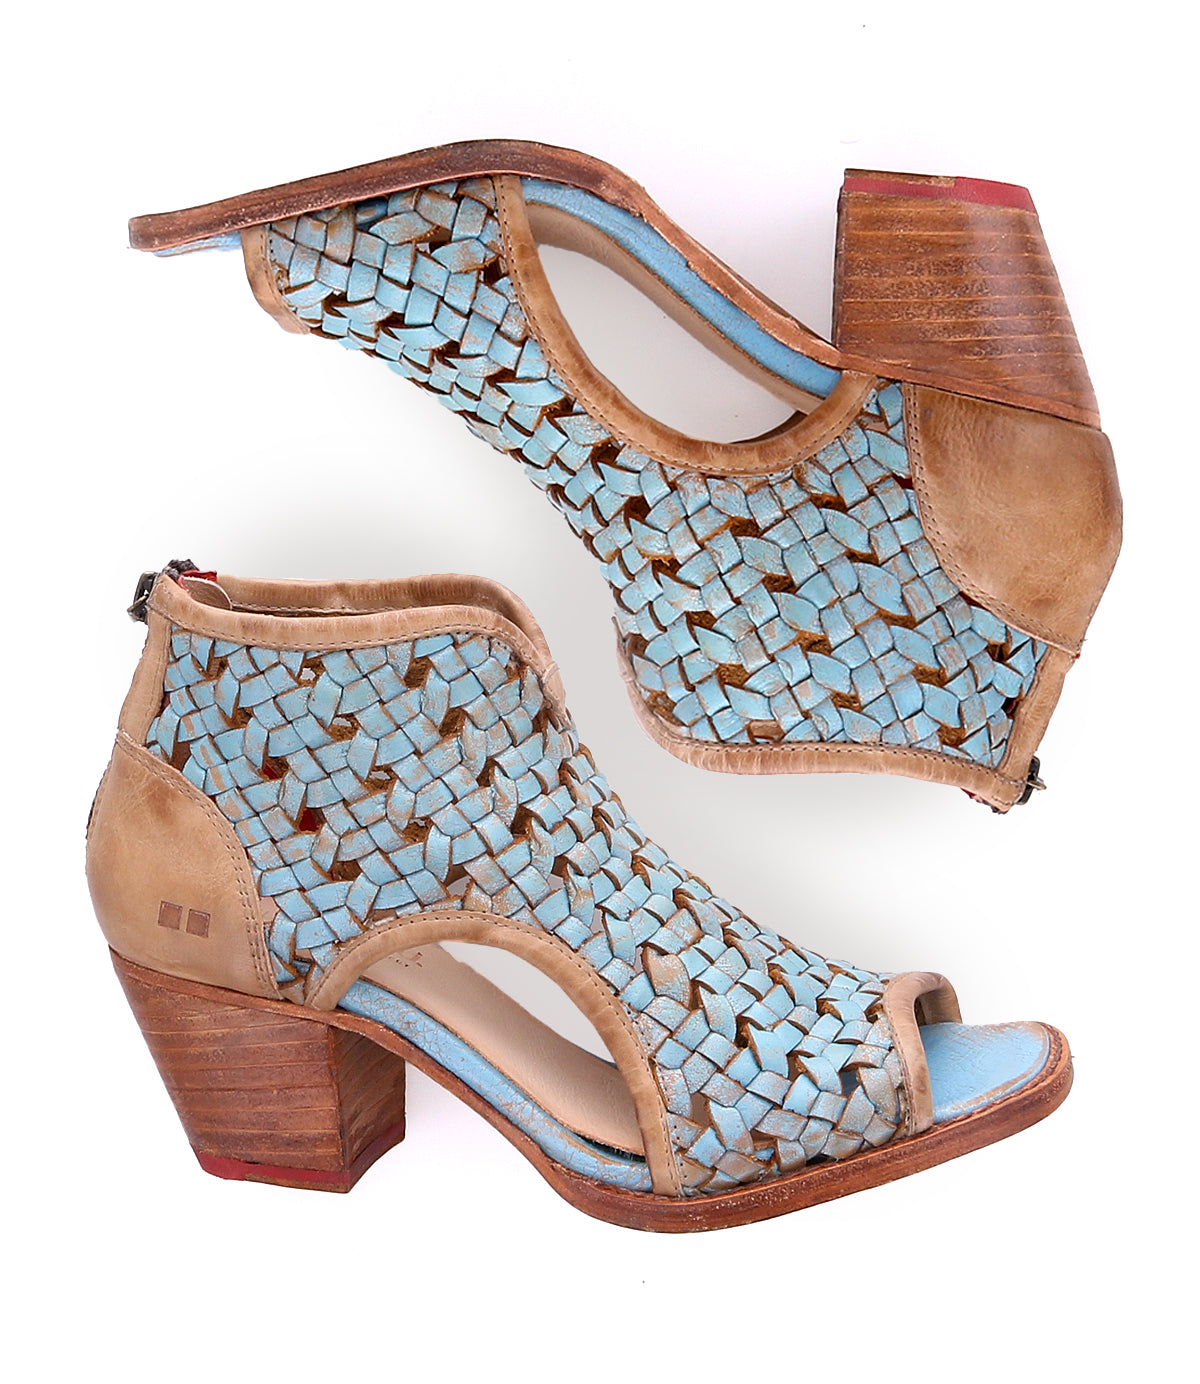 A pair of blue woven women's handmade peep-toe heels by Bed Stu on a white background.